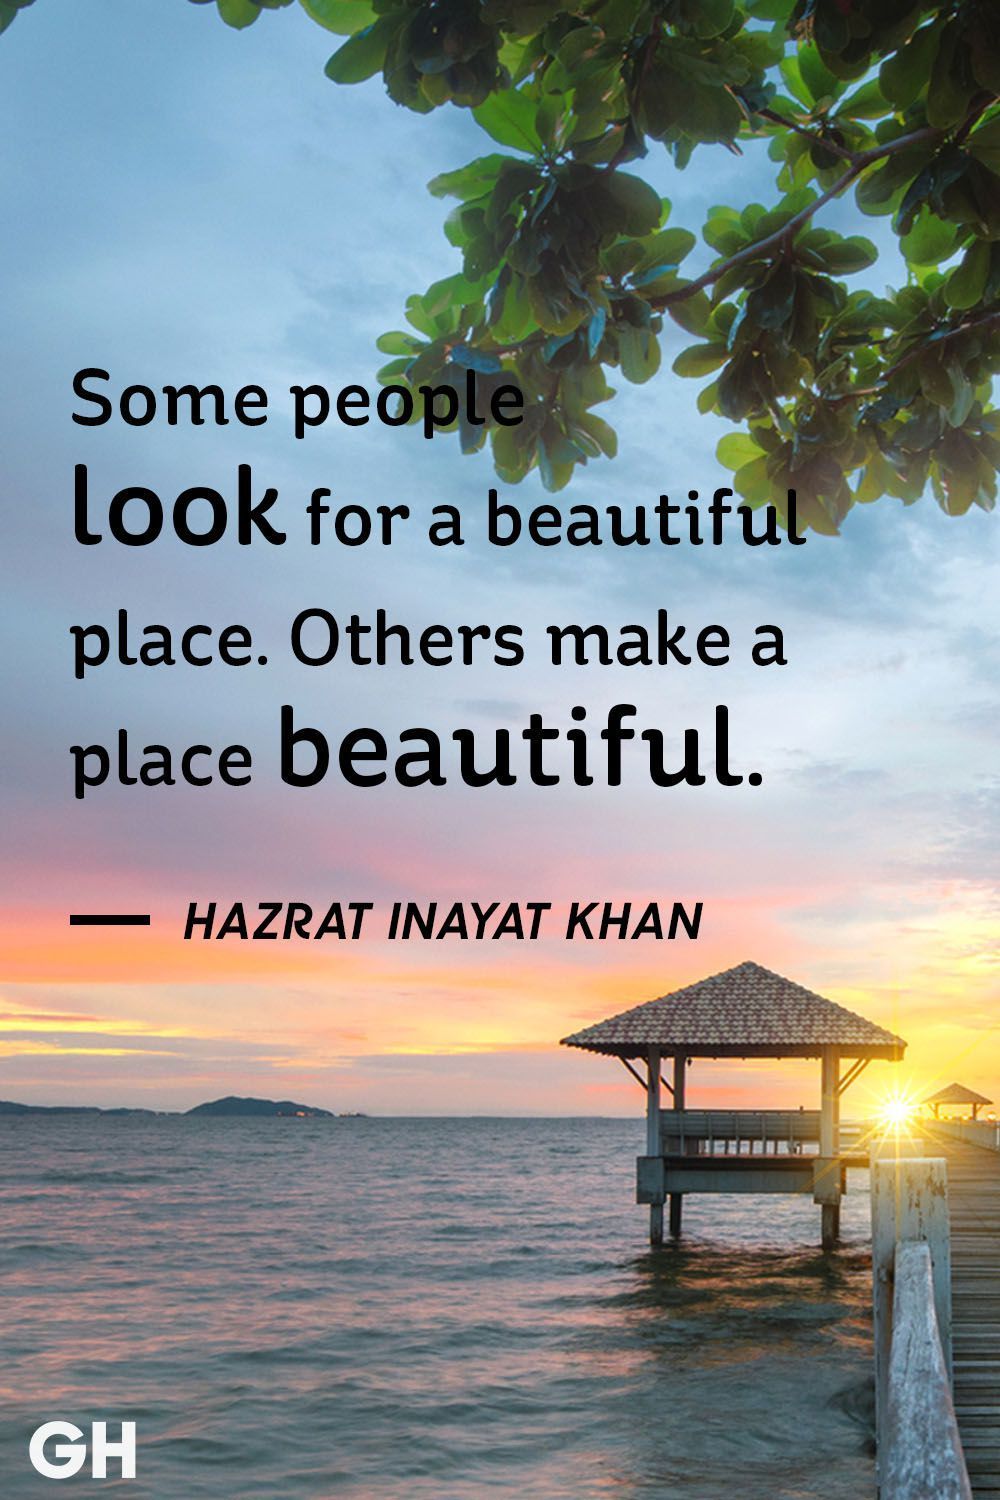 14 beauty Images with quotes ideas